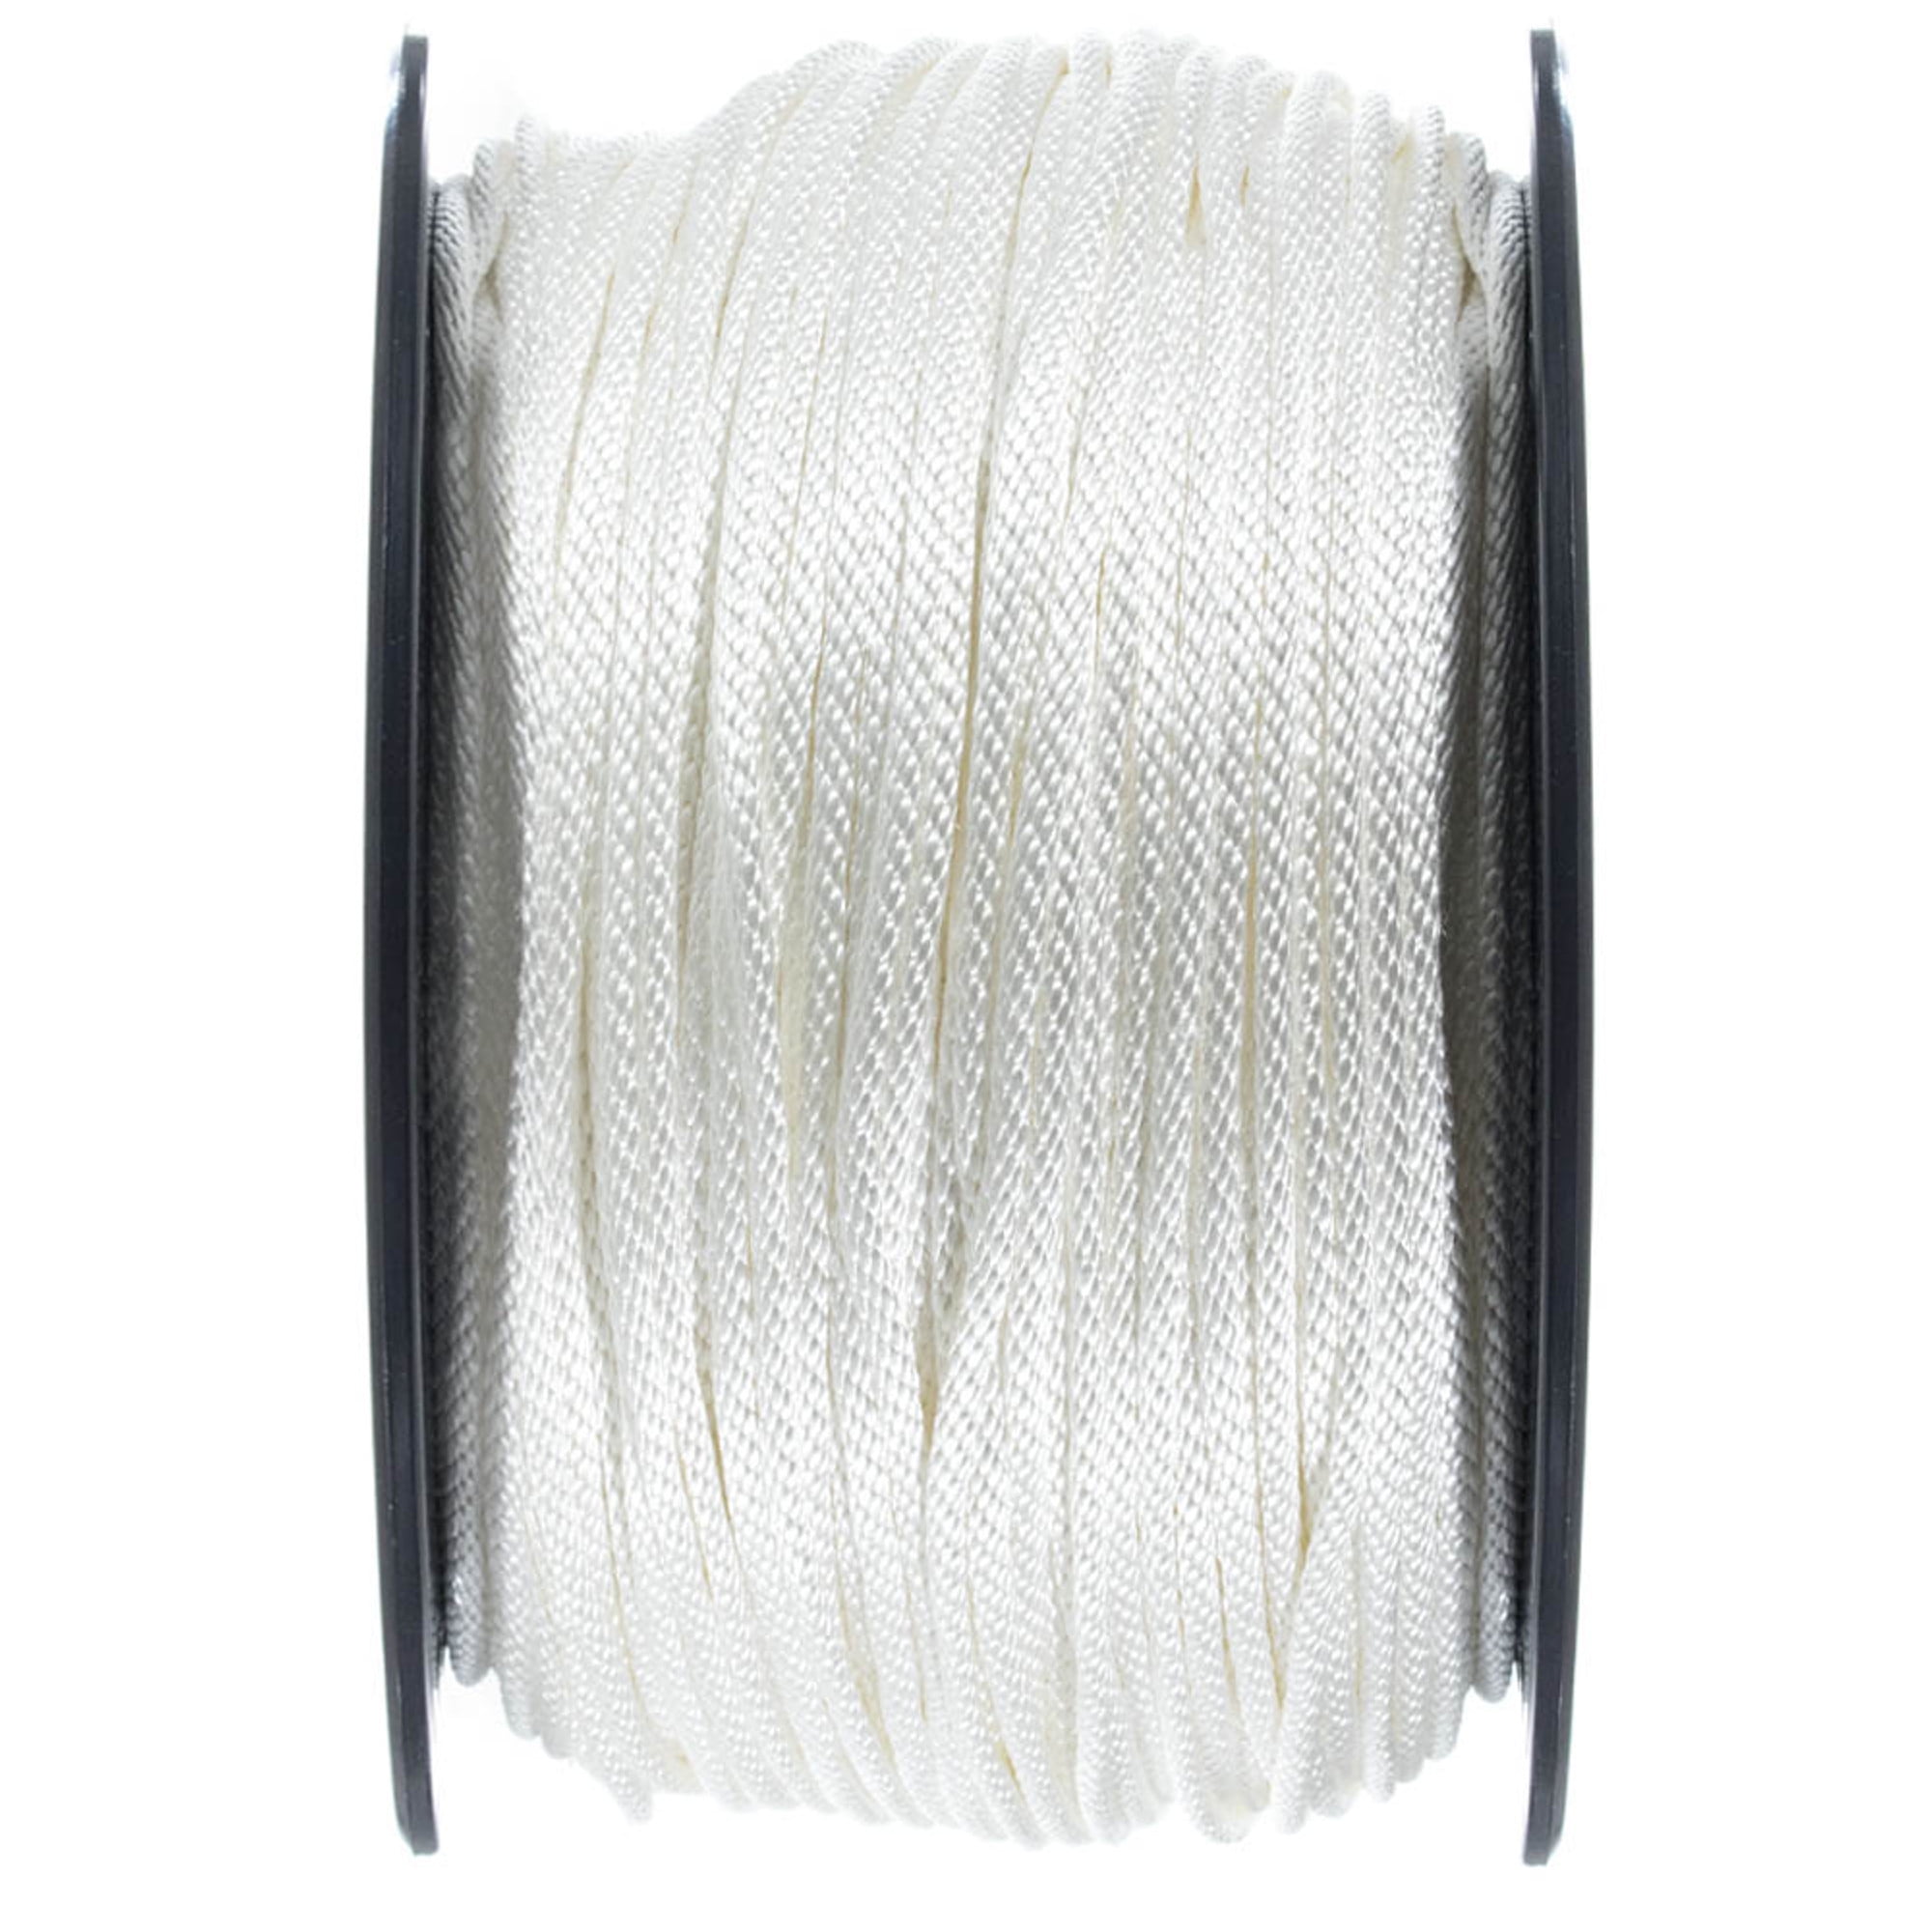 Available in various sizes & colors. Golberg Solid Braid 5/16-inch Utility Rope 